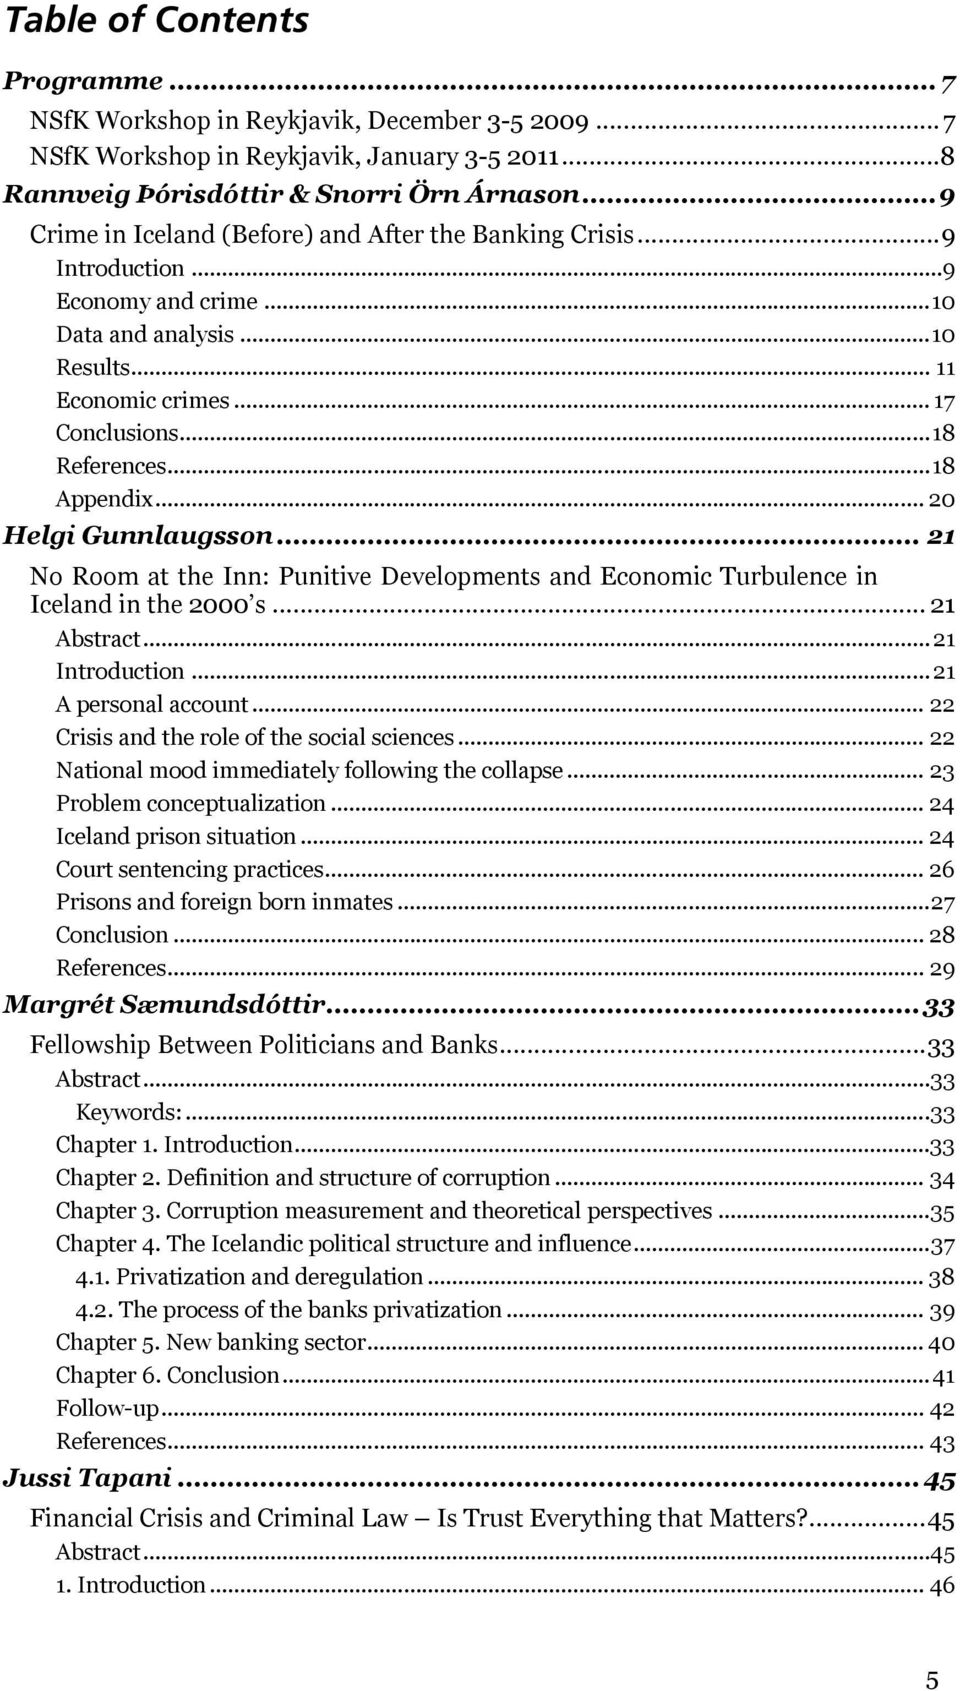 .. 18 Appendix... 20 Helgi Gunnlaugsson... 21 No Room at the Inn: Punitive Developments and Economic Turbulence in Iceland in the 2000 s... 21 Abstract... 21 Introduction... 21 A personal account.